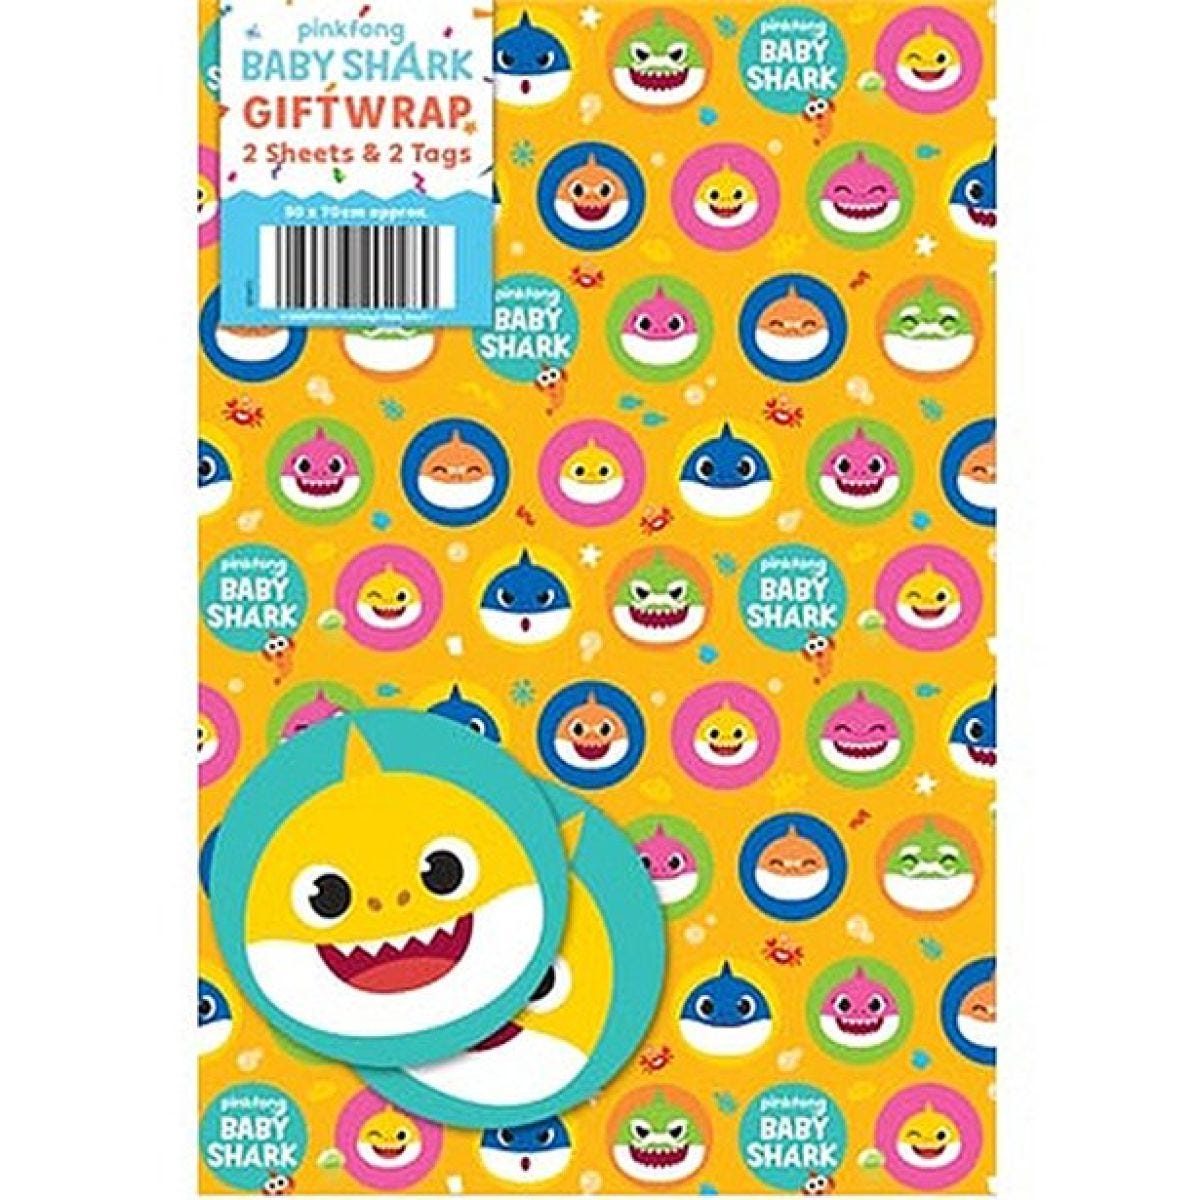 Baby Shark Wrapping Paper 2 Sheets (50cm X 70cm) with Tags